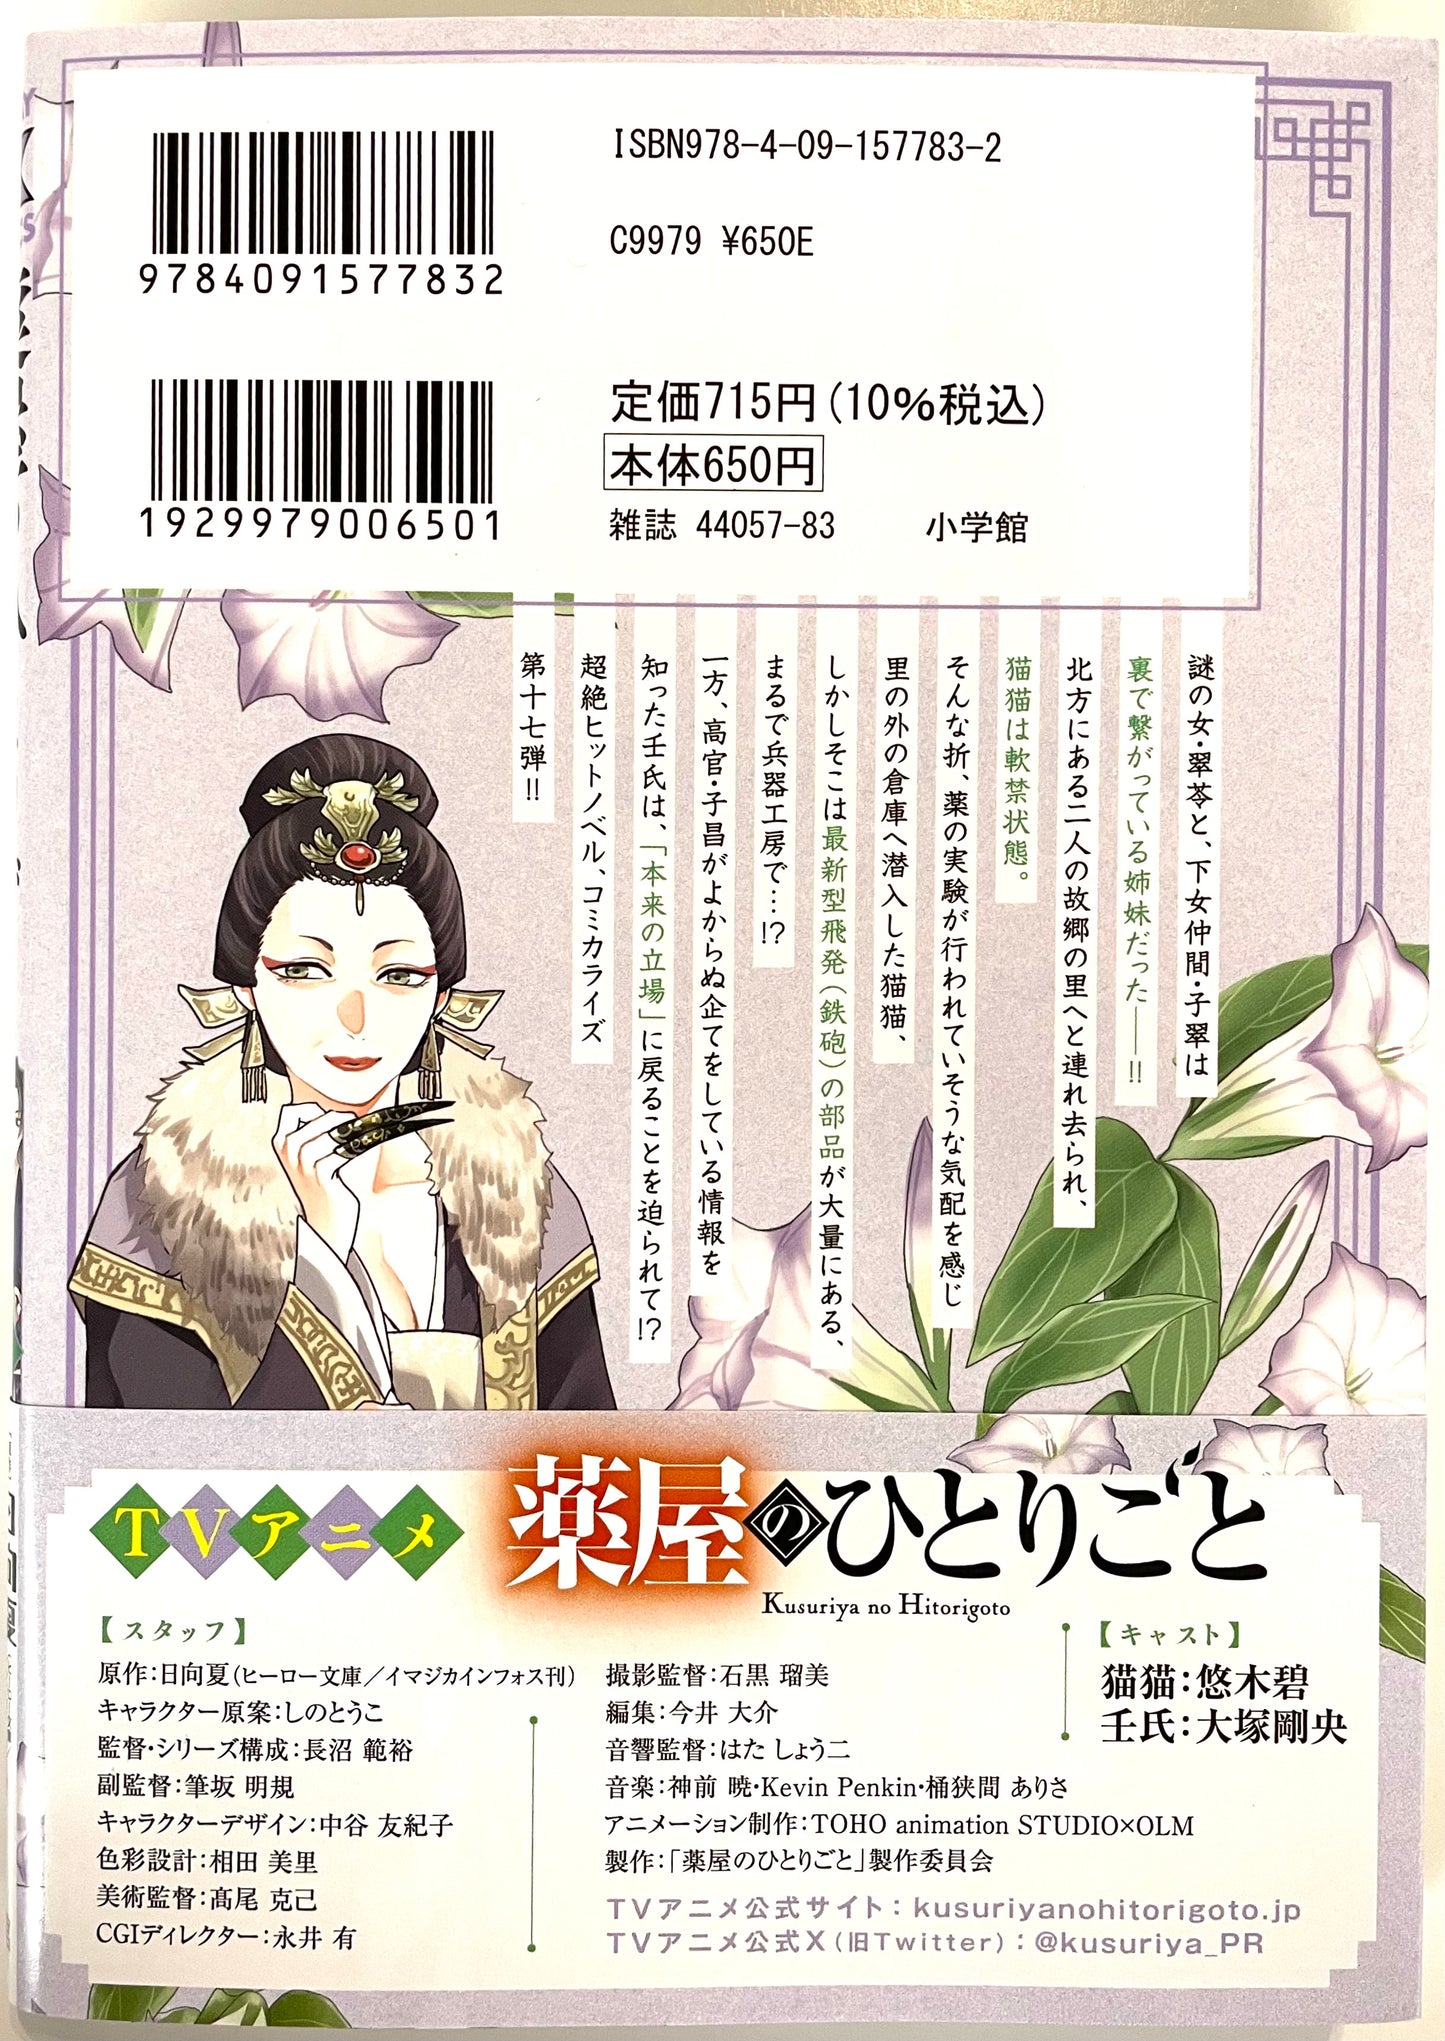 The Apothecary Diaries: The Palace Cloister Mystery-Solving Notebook of Mao Mao Vol.17-Official Japanese Edition